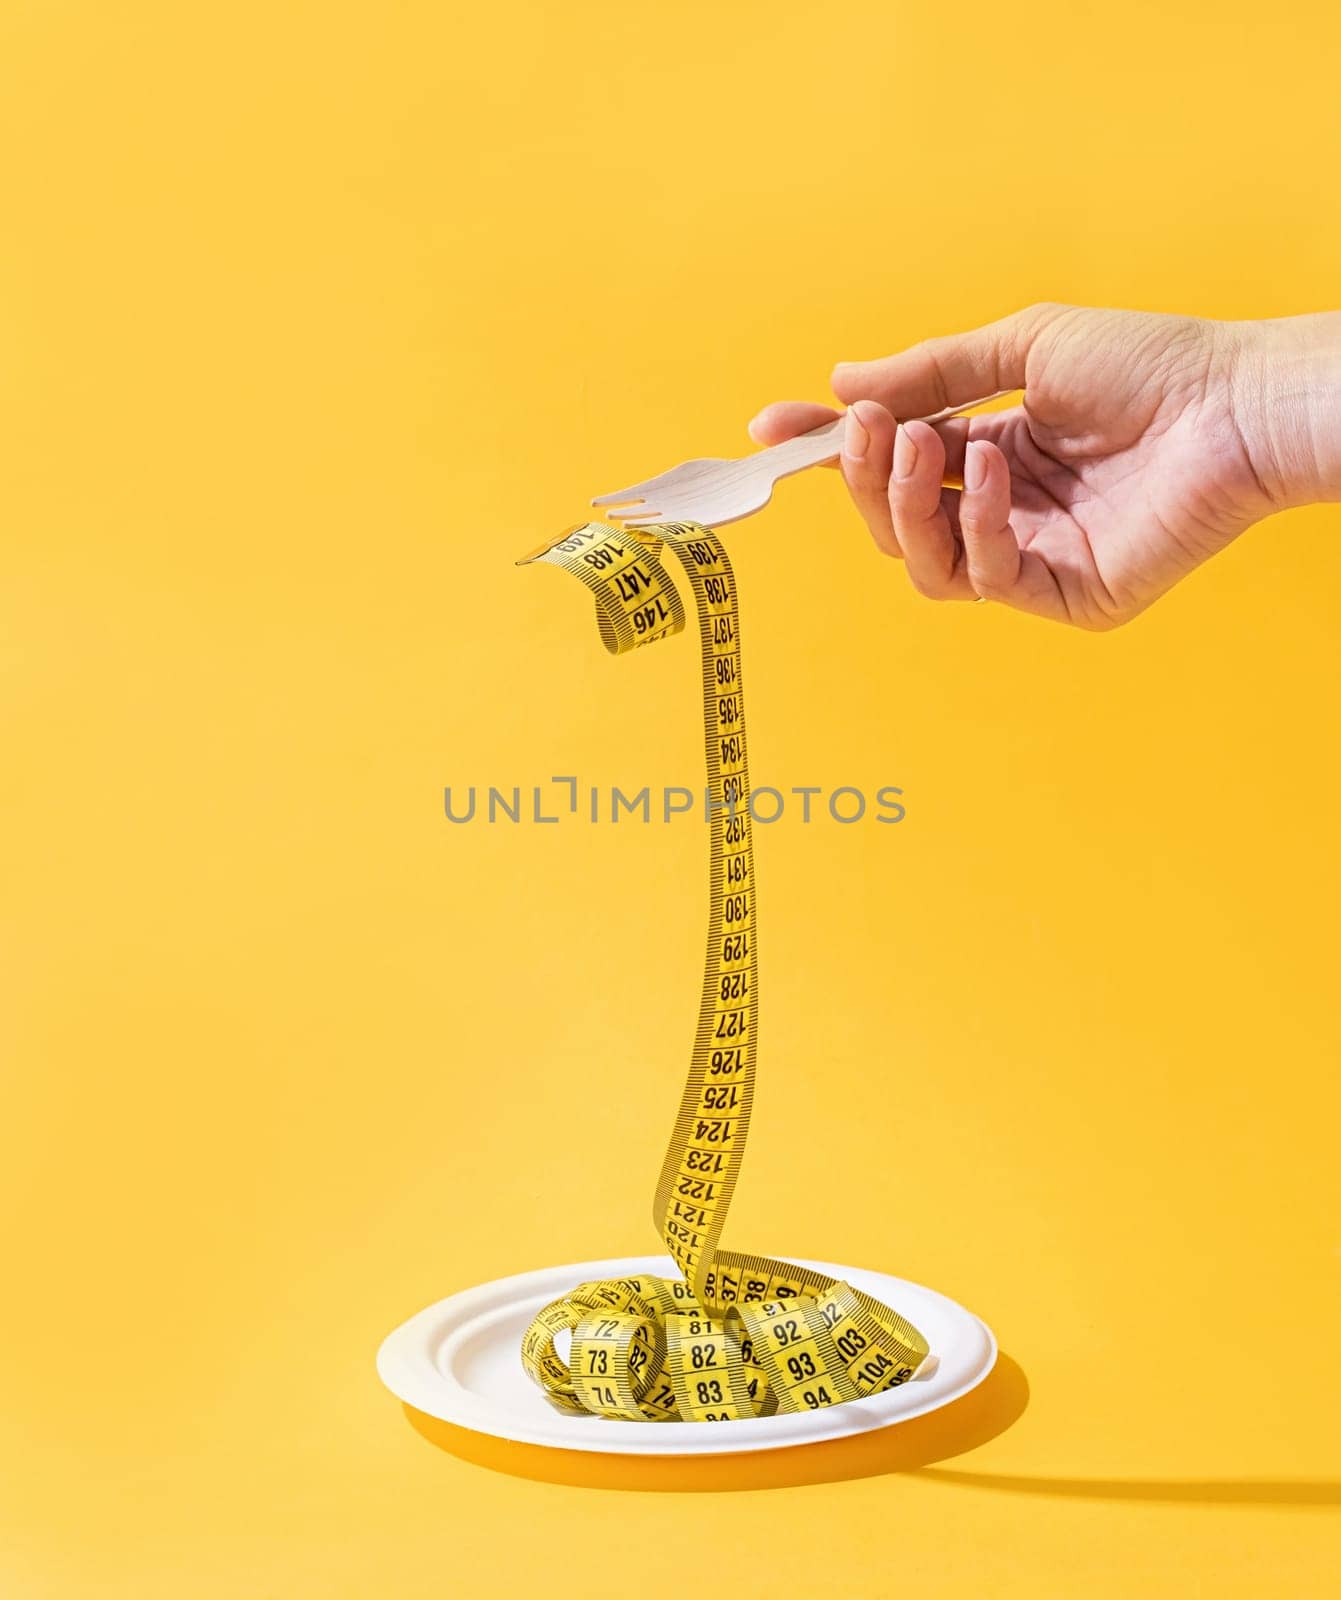 Dieting concept. woman hands holding colorful measuring tape front view on disposable plate on bright yellow background